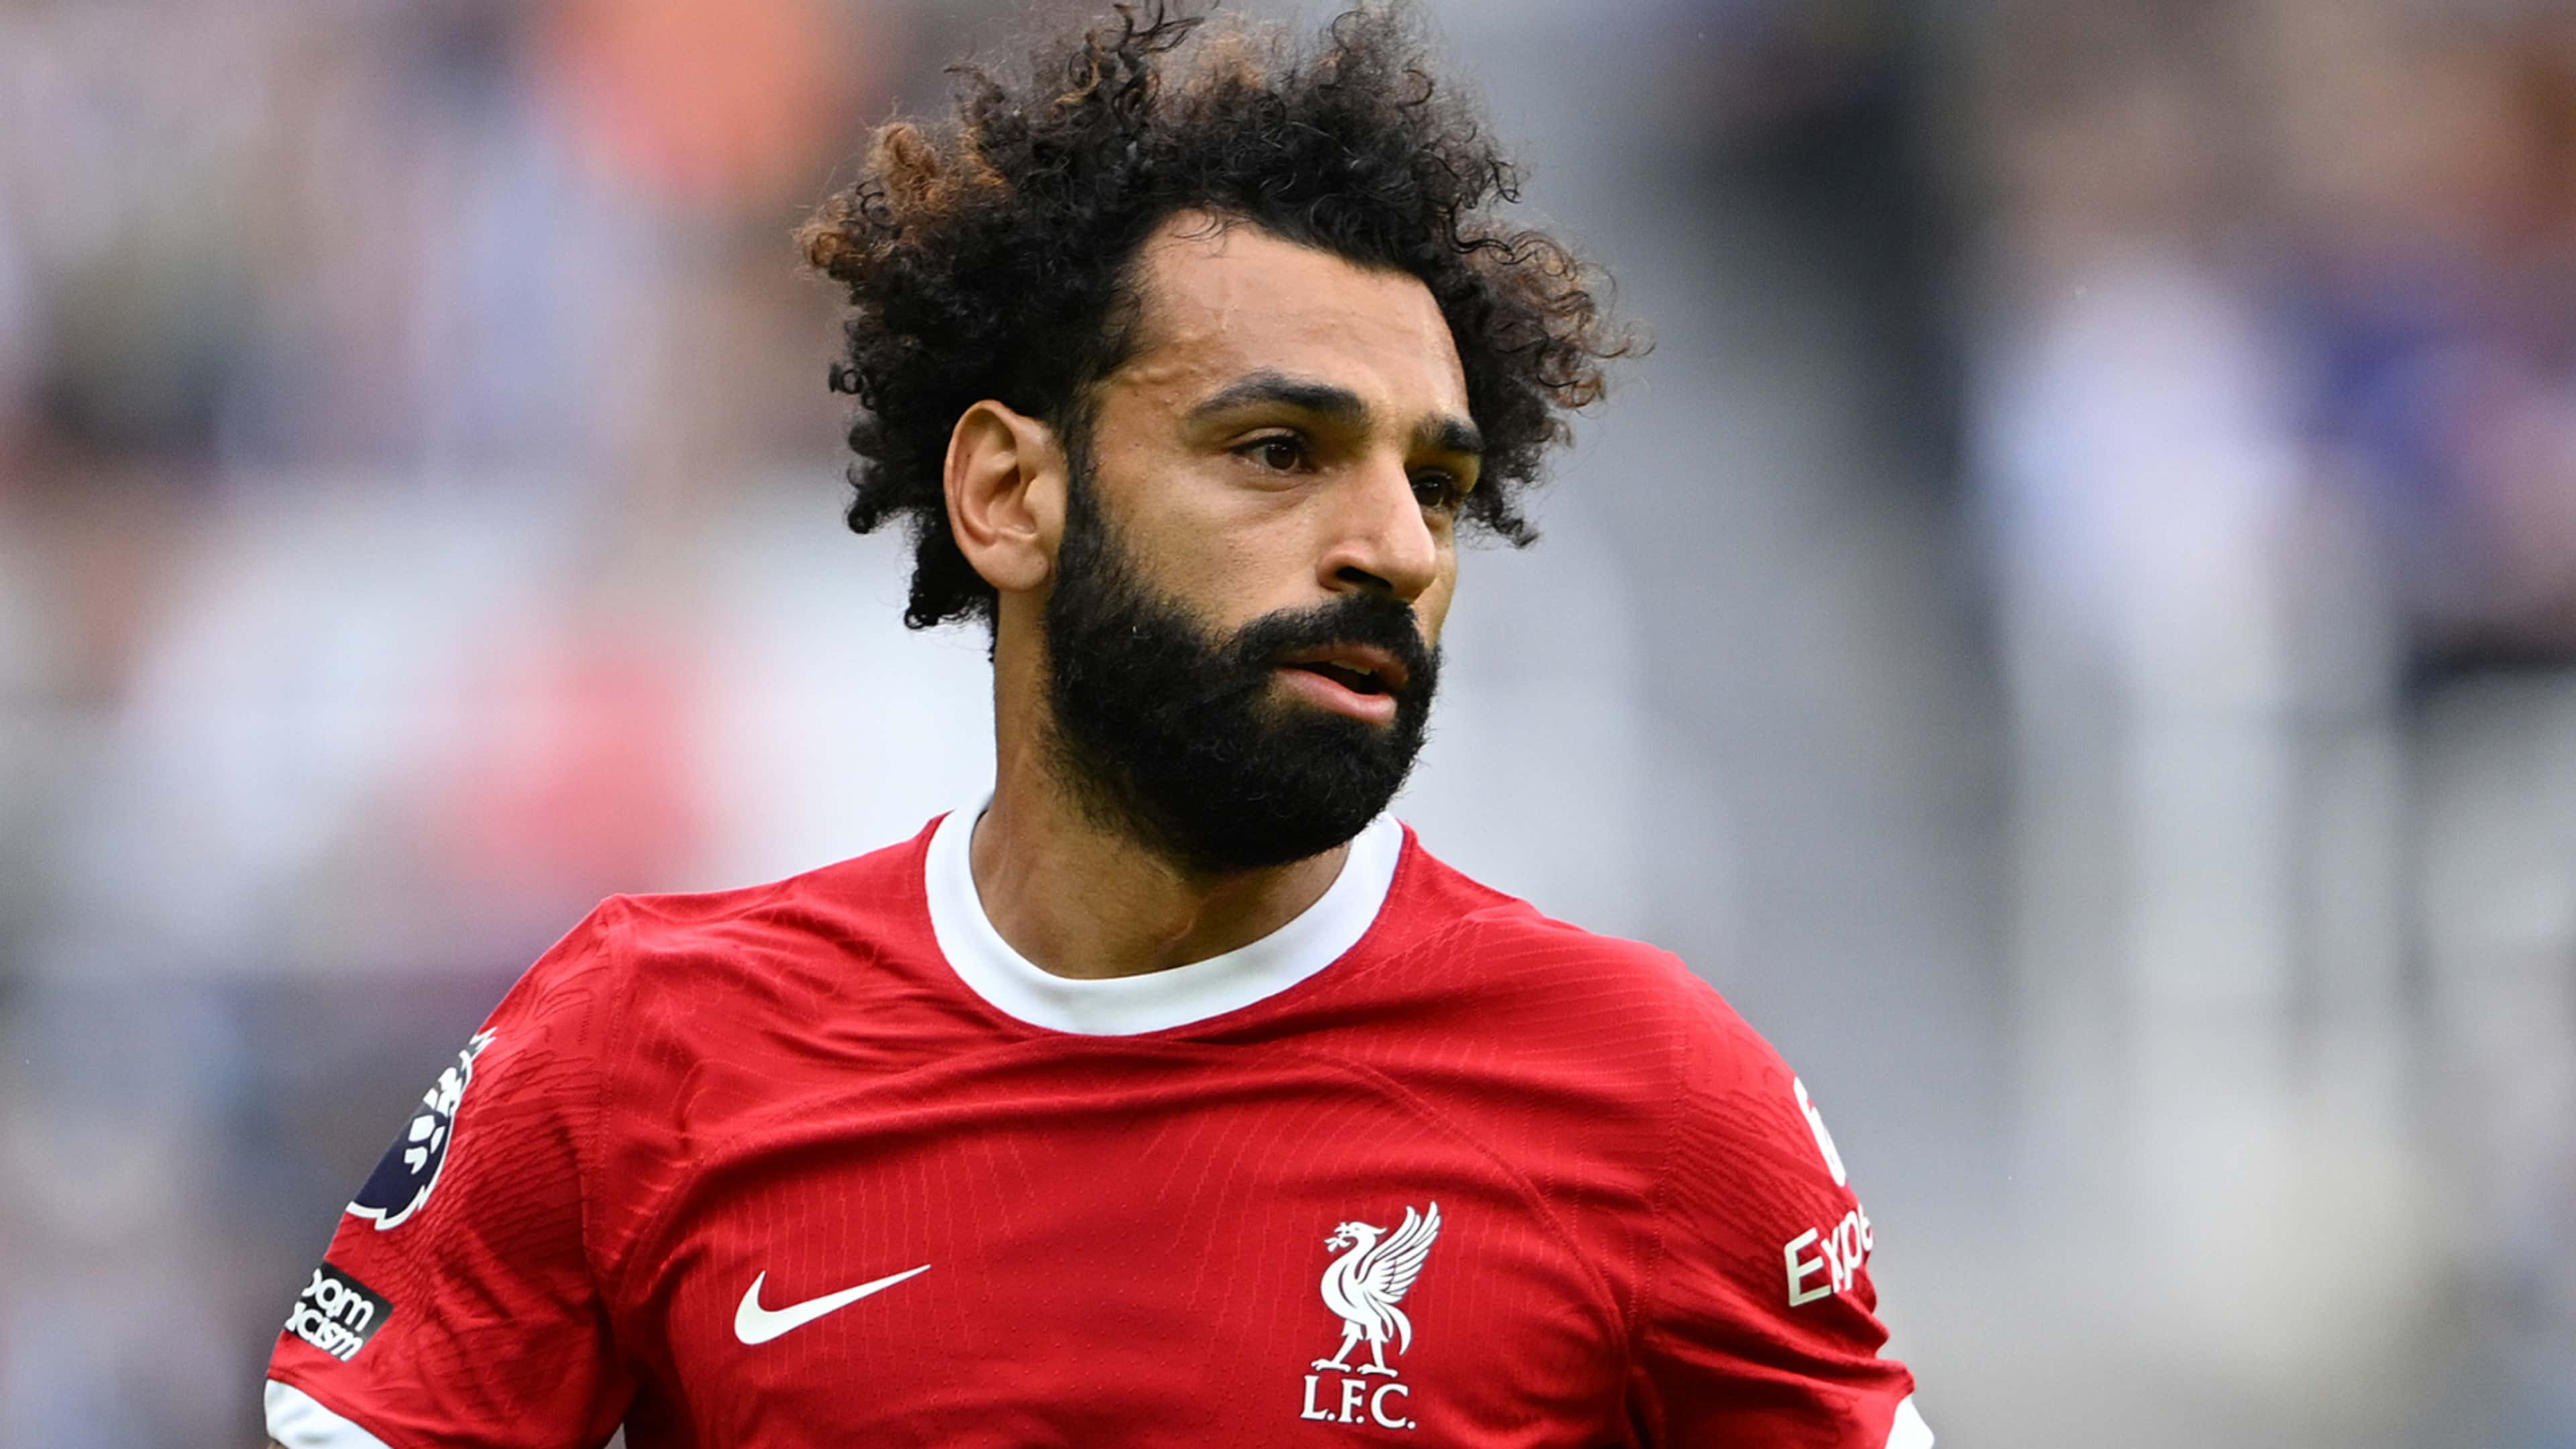 Al Ittihad reportedly made a world record offer for Mohamed Salah as they urgently try to get the Liverpool legend. | Goal.com